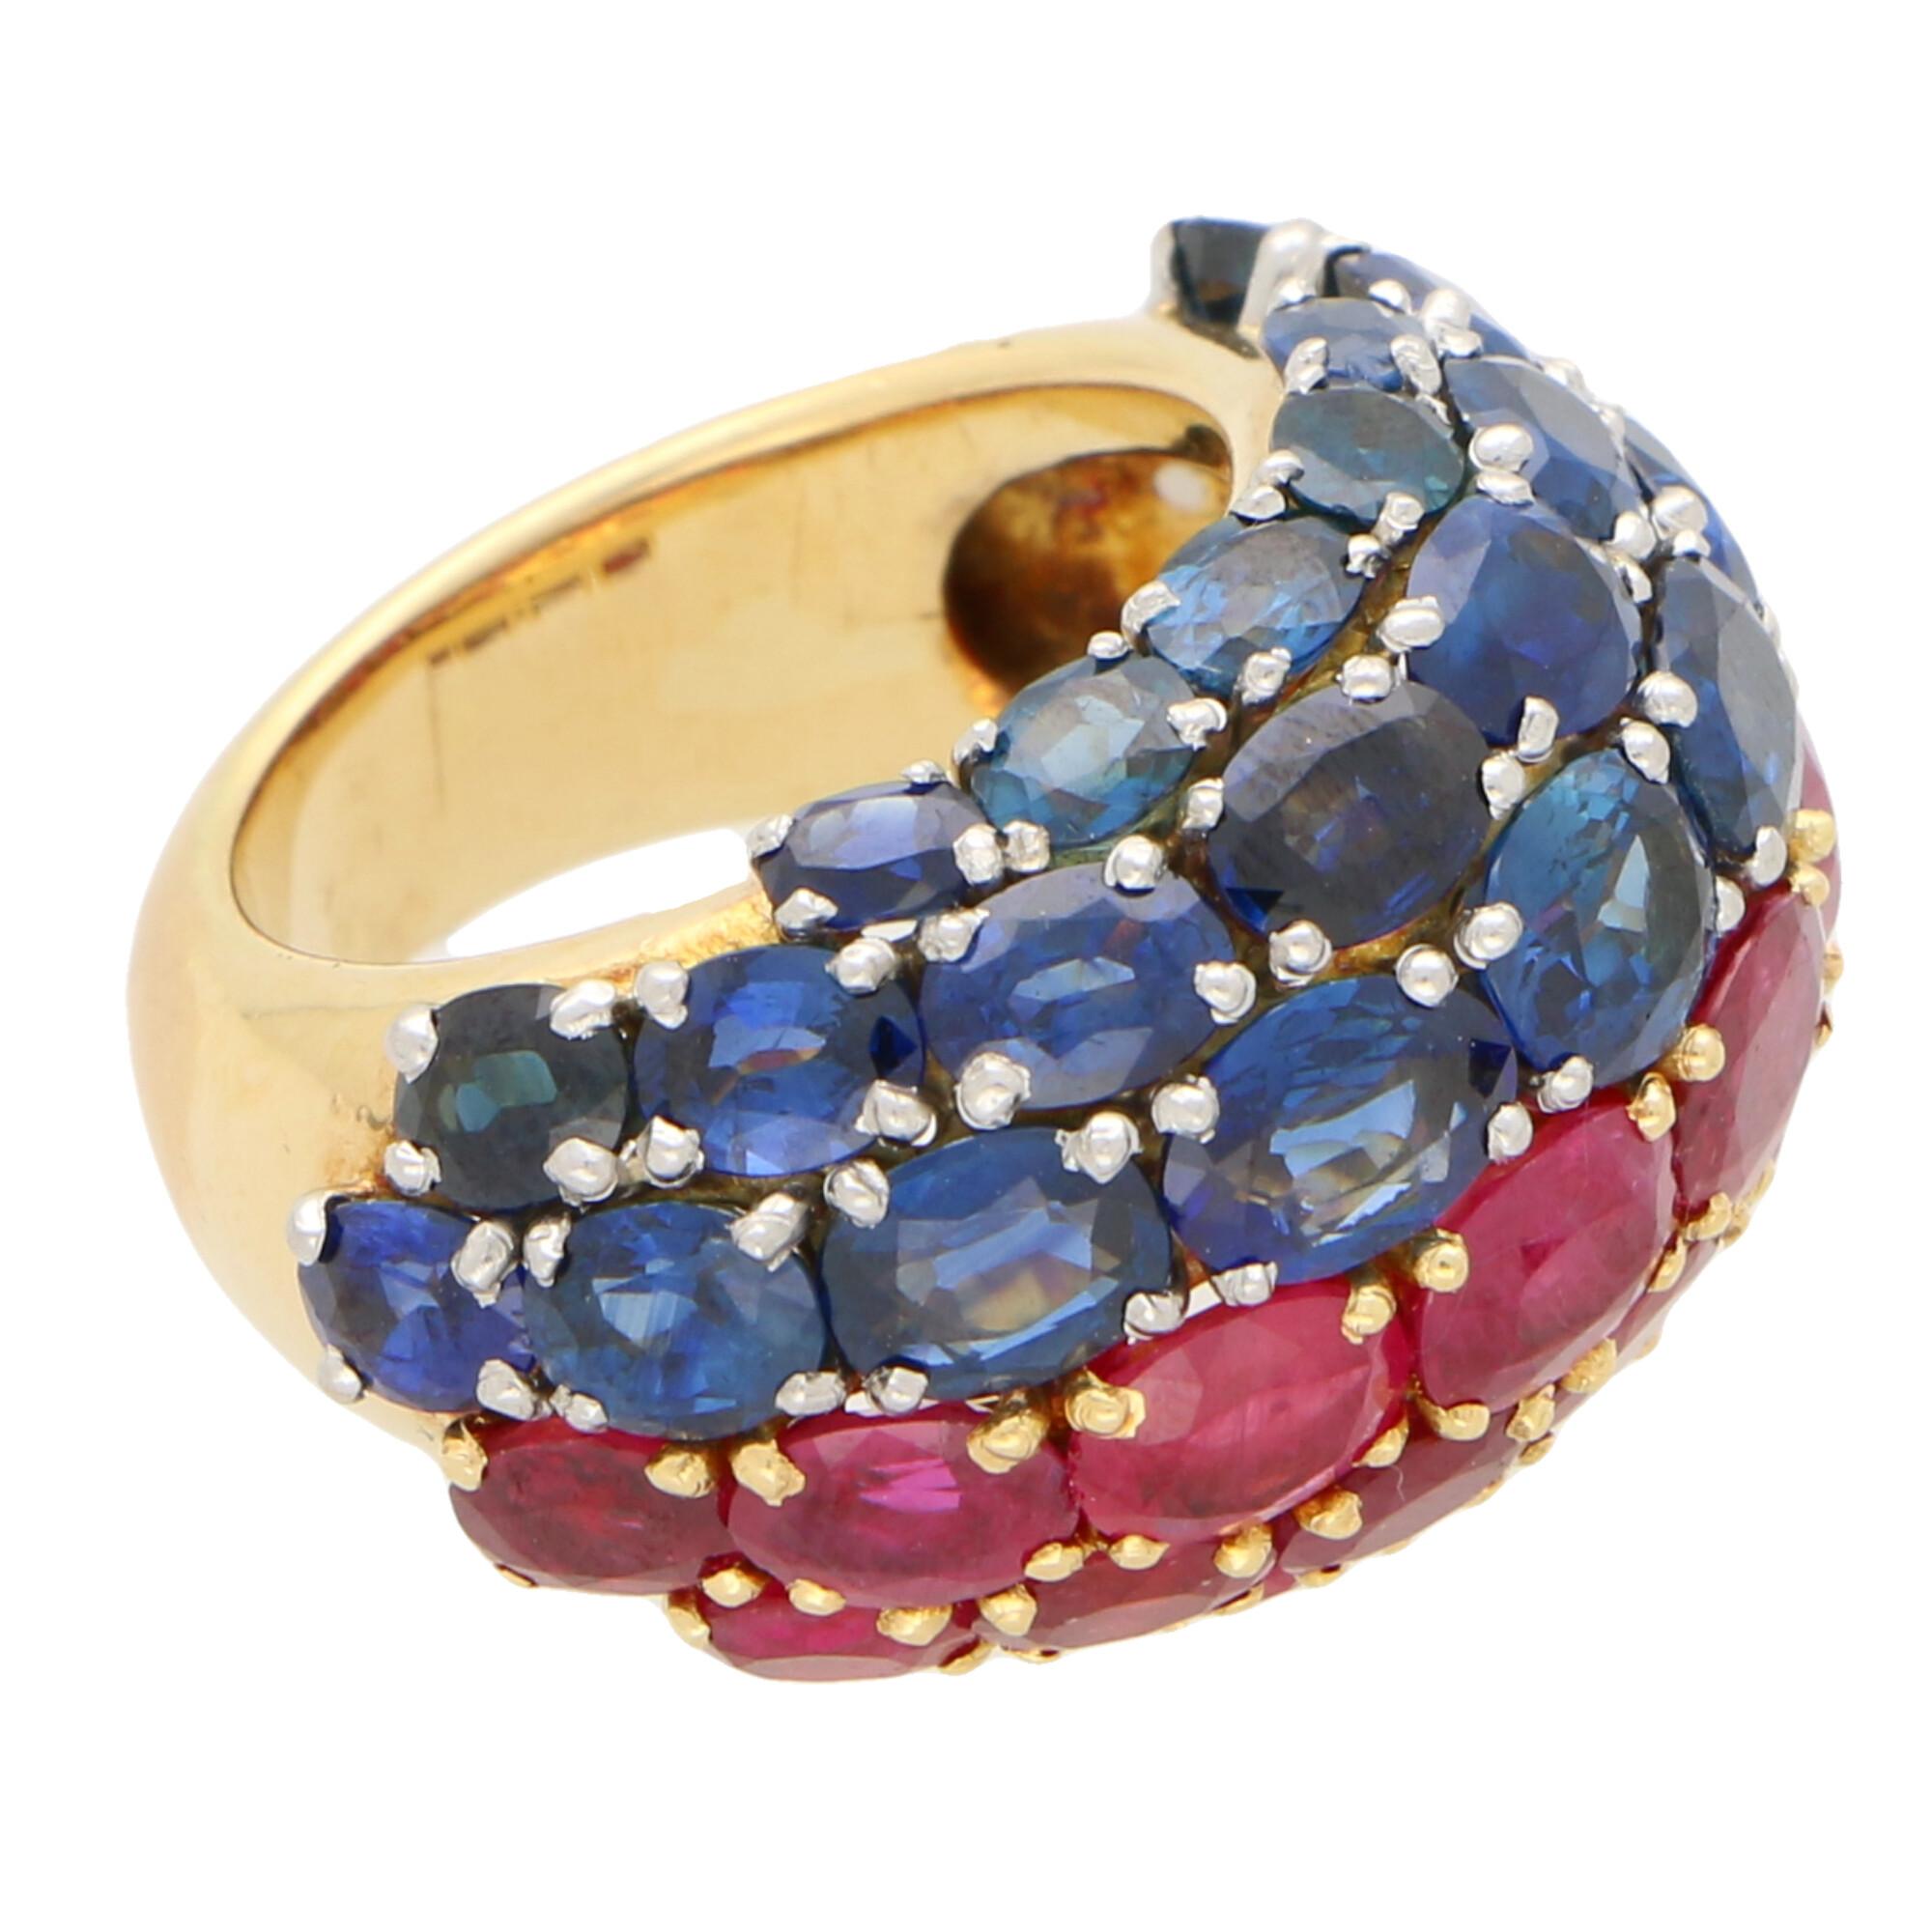 Retro Ruby and Sapphire Bombe Ring Set in 18 Karat Yellow Gold and Platinum